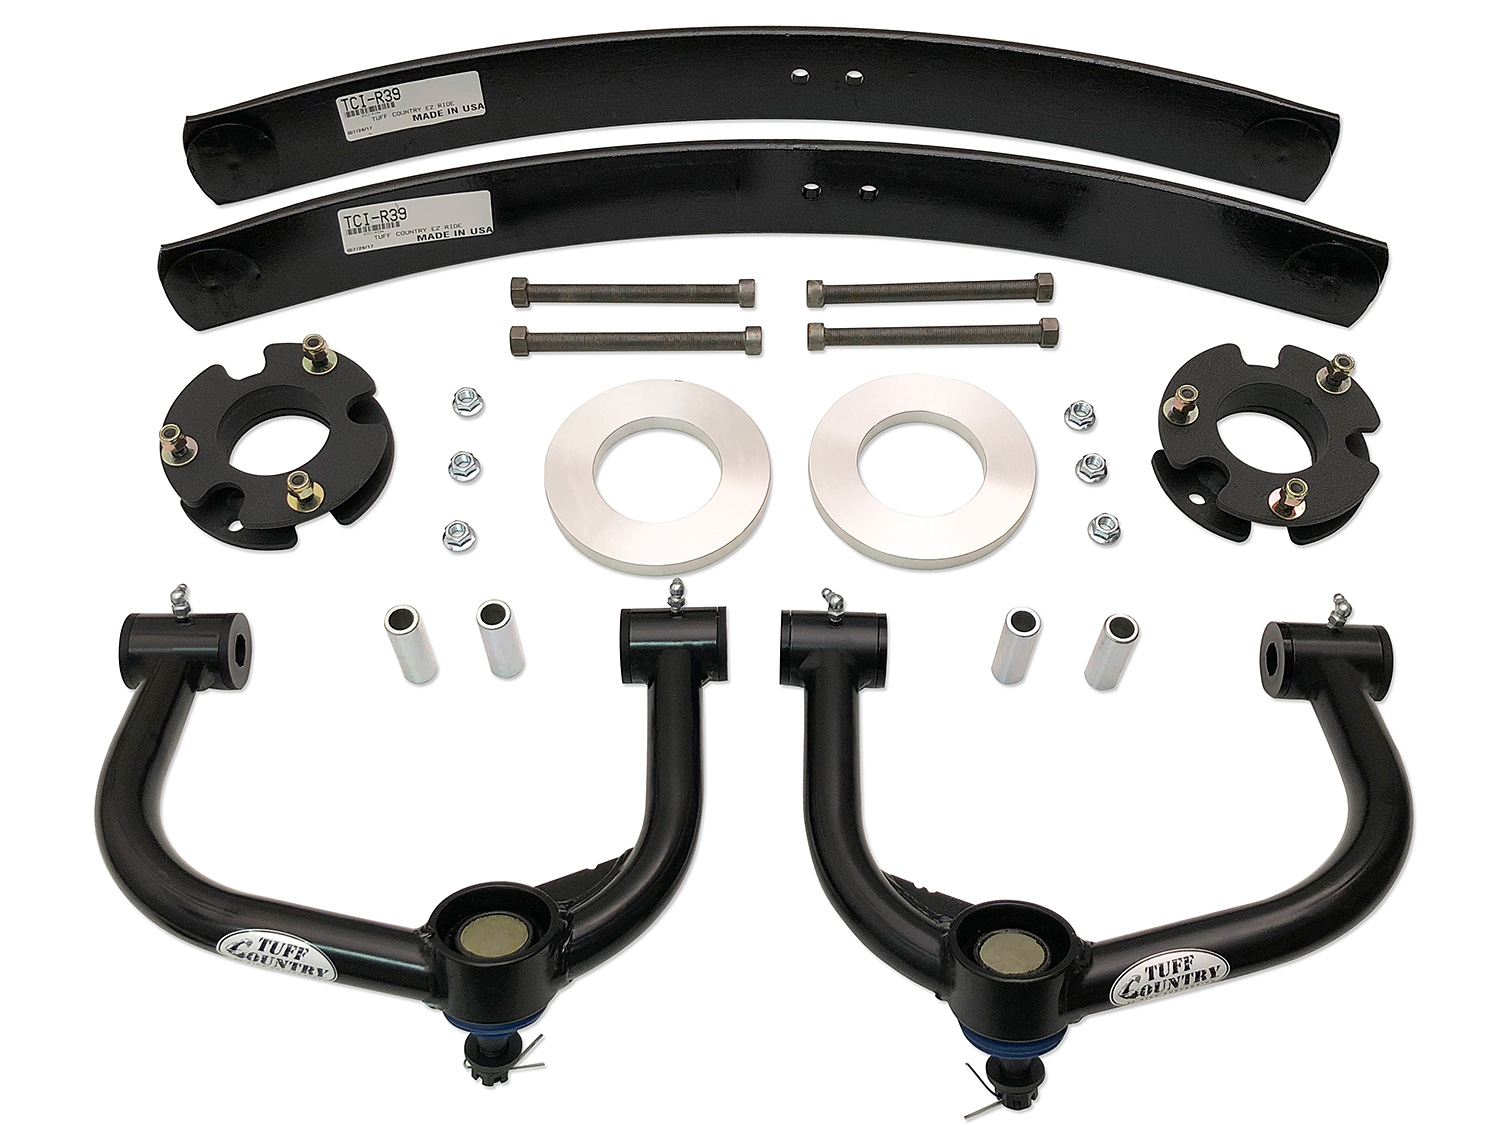  3 Inch Lift Kit15-19 Ford F150 4x4 & 2WD Tuff Country